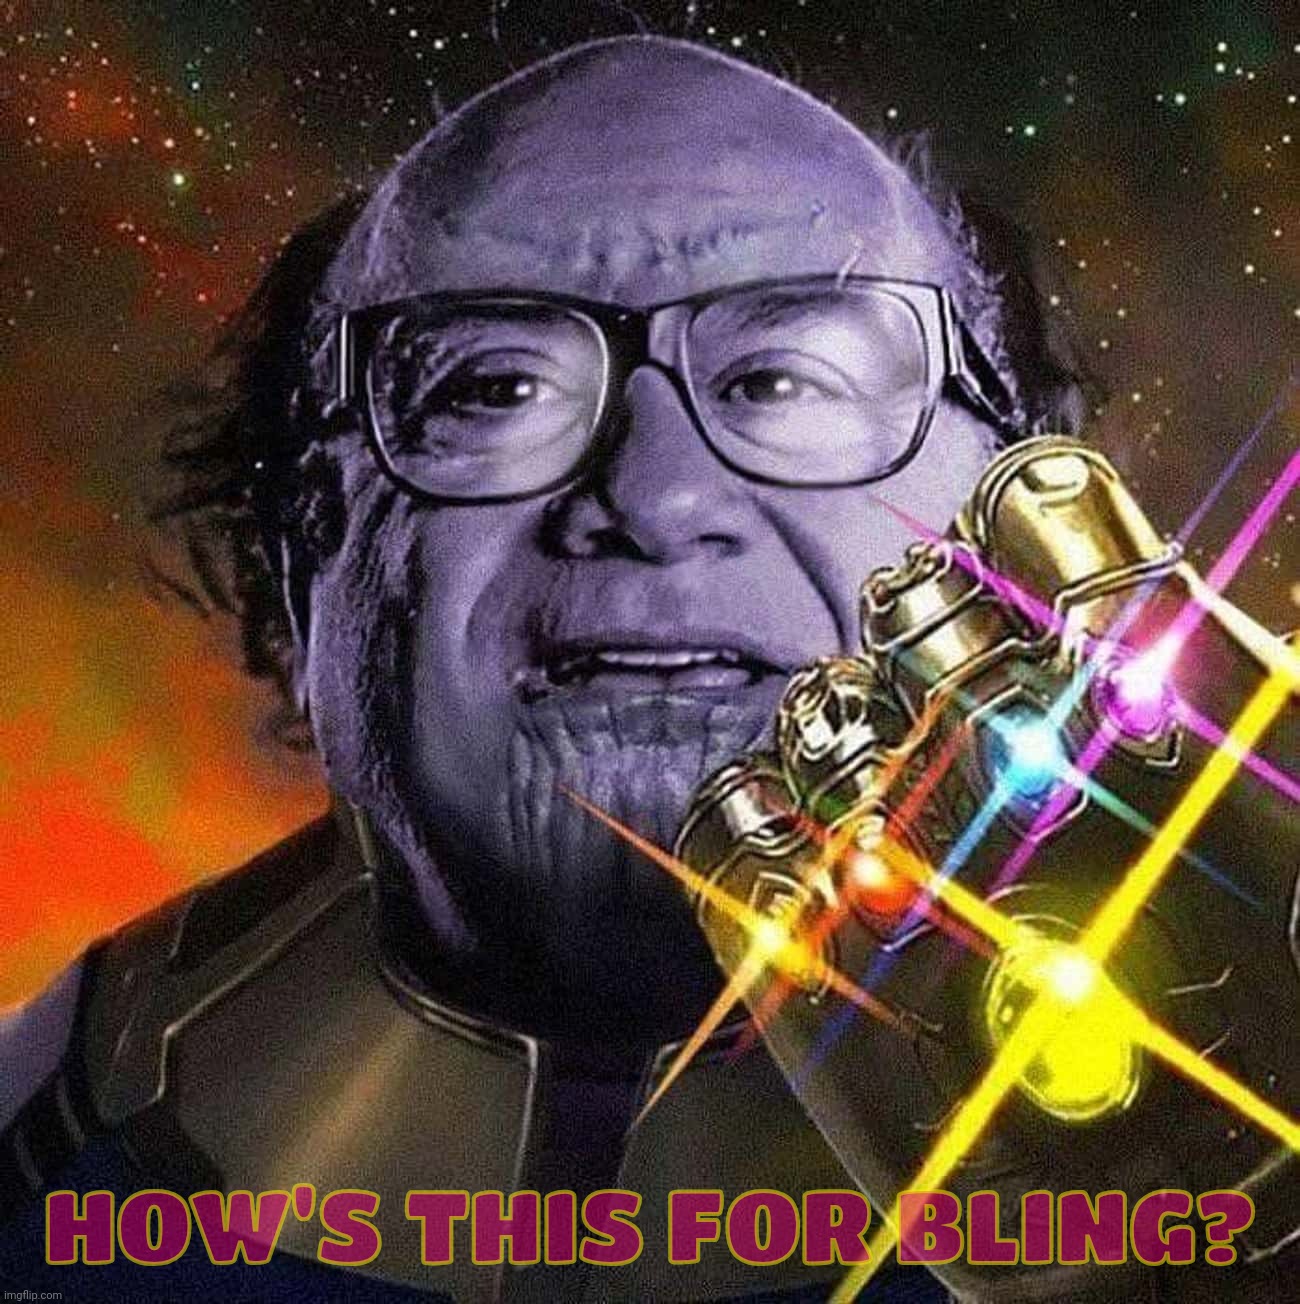 Over Thanos worship. You know who you are, sycophant. | HOW'S THIS FOR BLING? | image tagged in danny devito,thanos,mad titan,sad titan,moonie,because he had no definable personality of his own | made w/ Imgflip meme maker